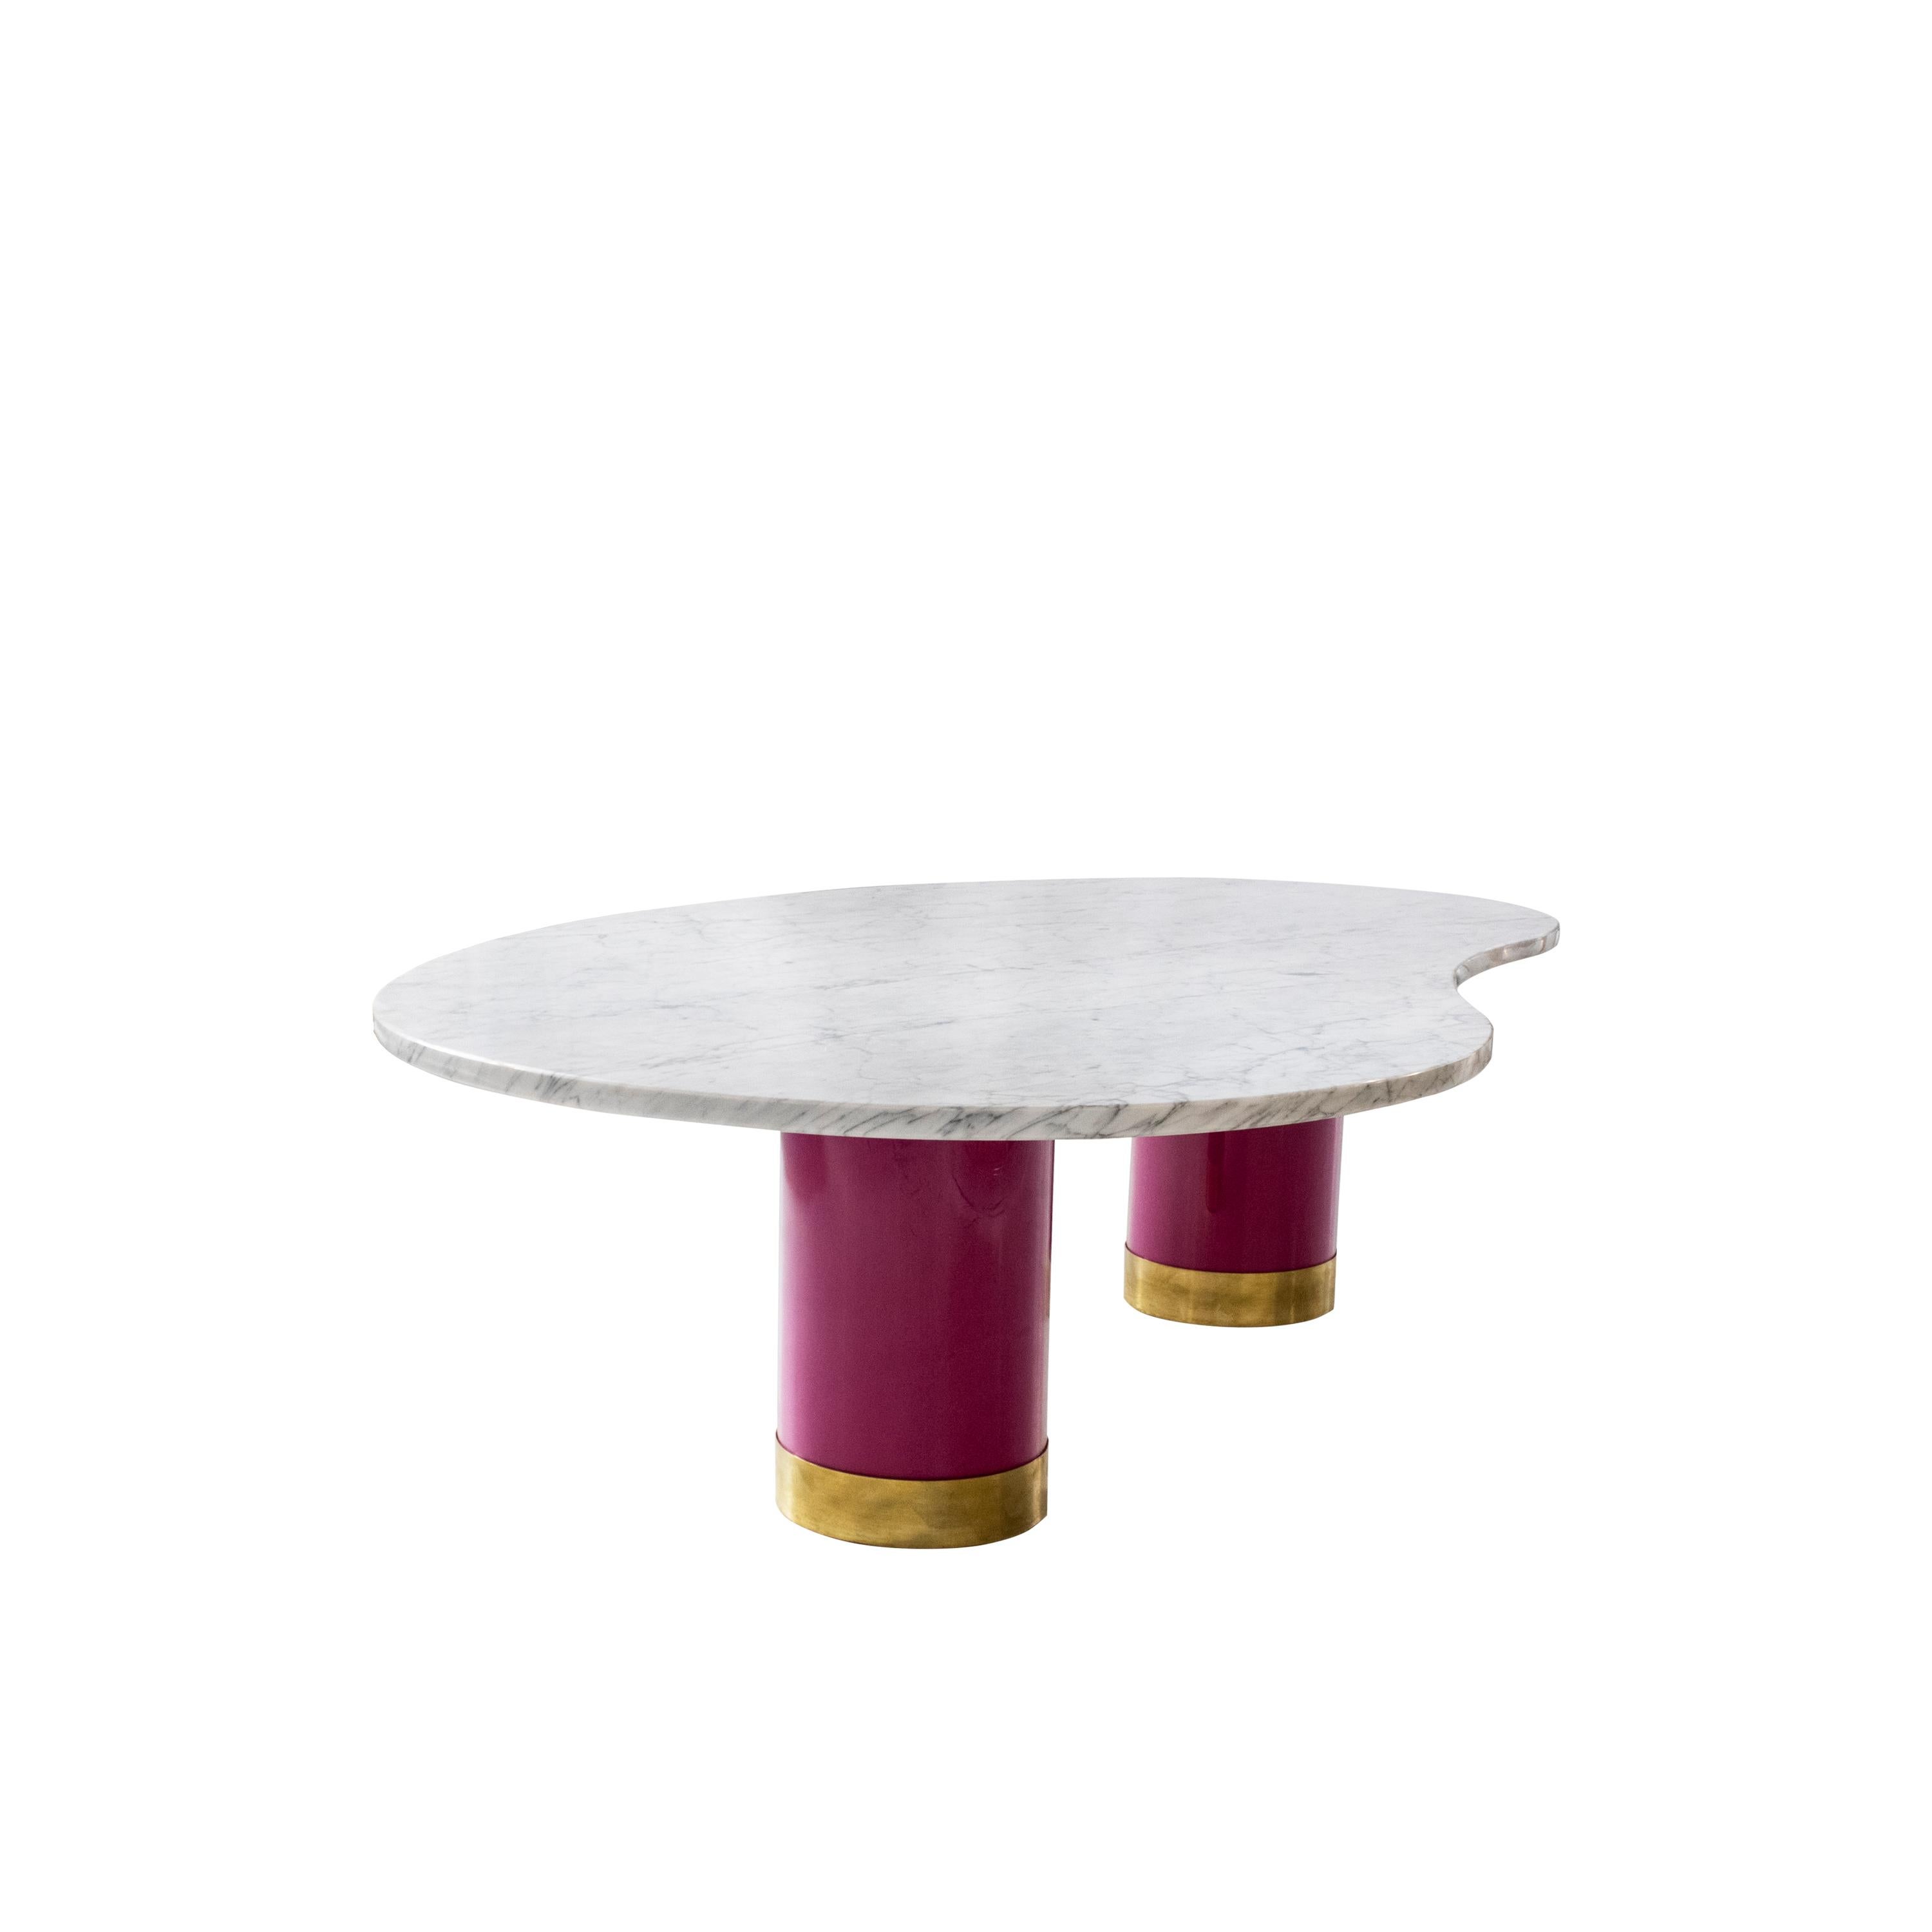 Coffee table designed by IKB 191, with two bases made of transparent methacrylate filled with a pink natural pigment, finished with a brass plate and a curved Carrara marble top.